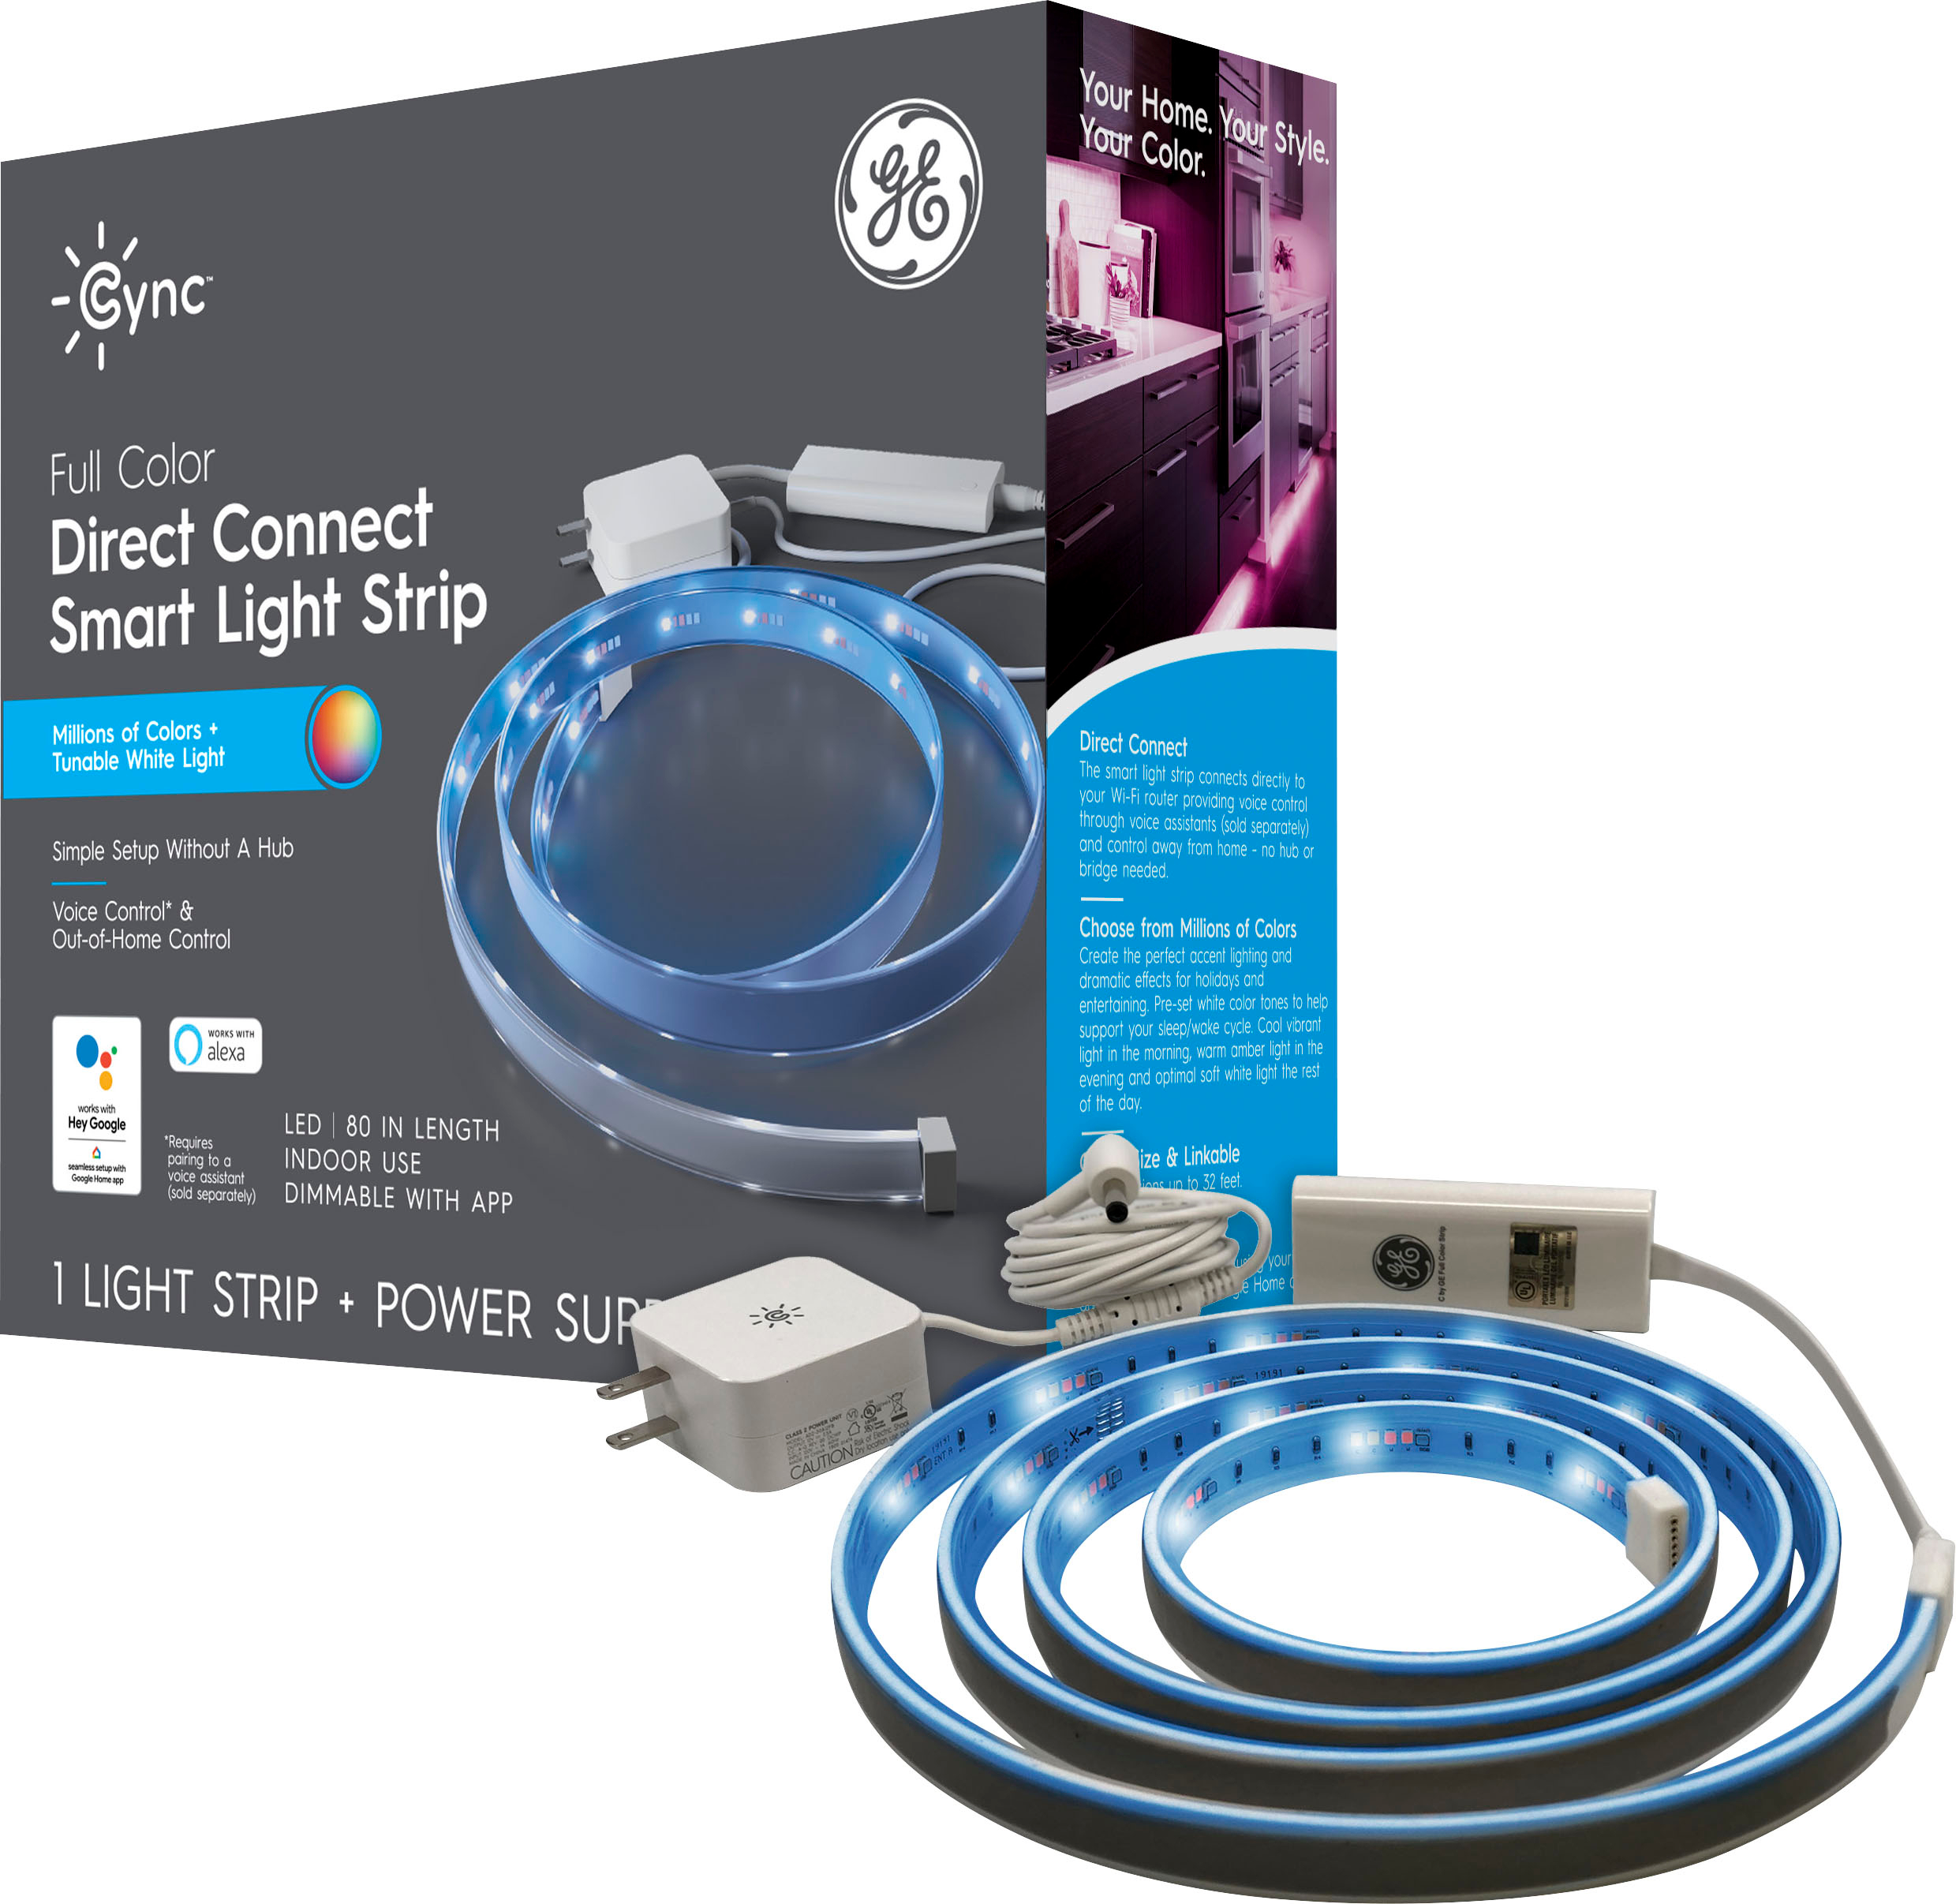 Ge Cync Full Color Direct Connect Led, Can Alexa Connect To Led Lights